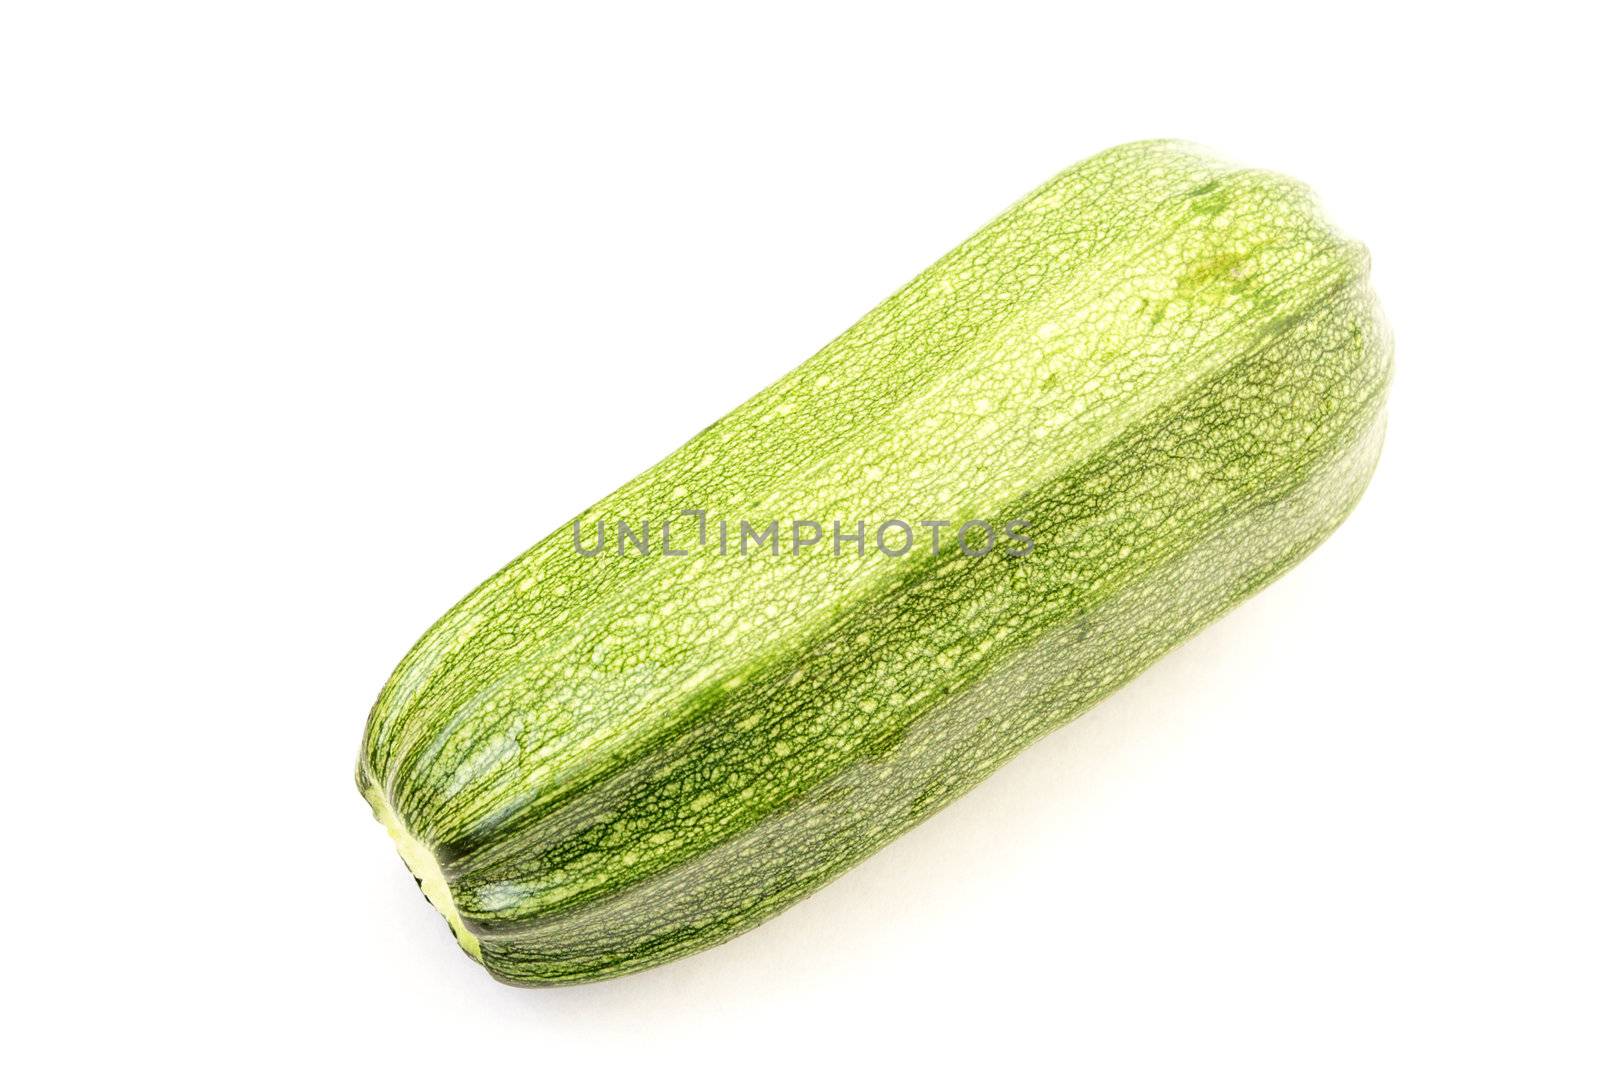 Single green zucchini isolated on white by pulen